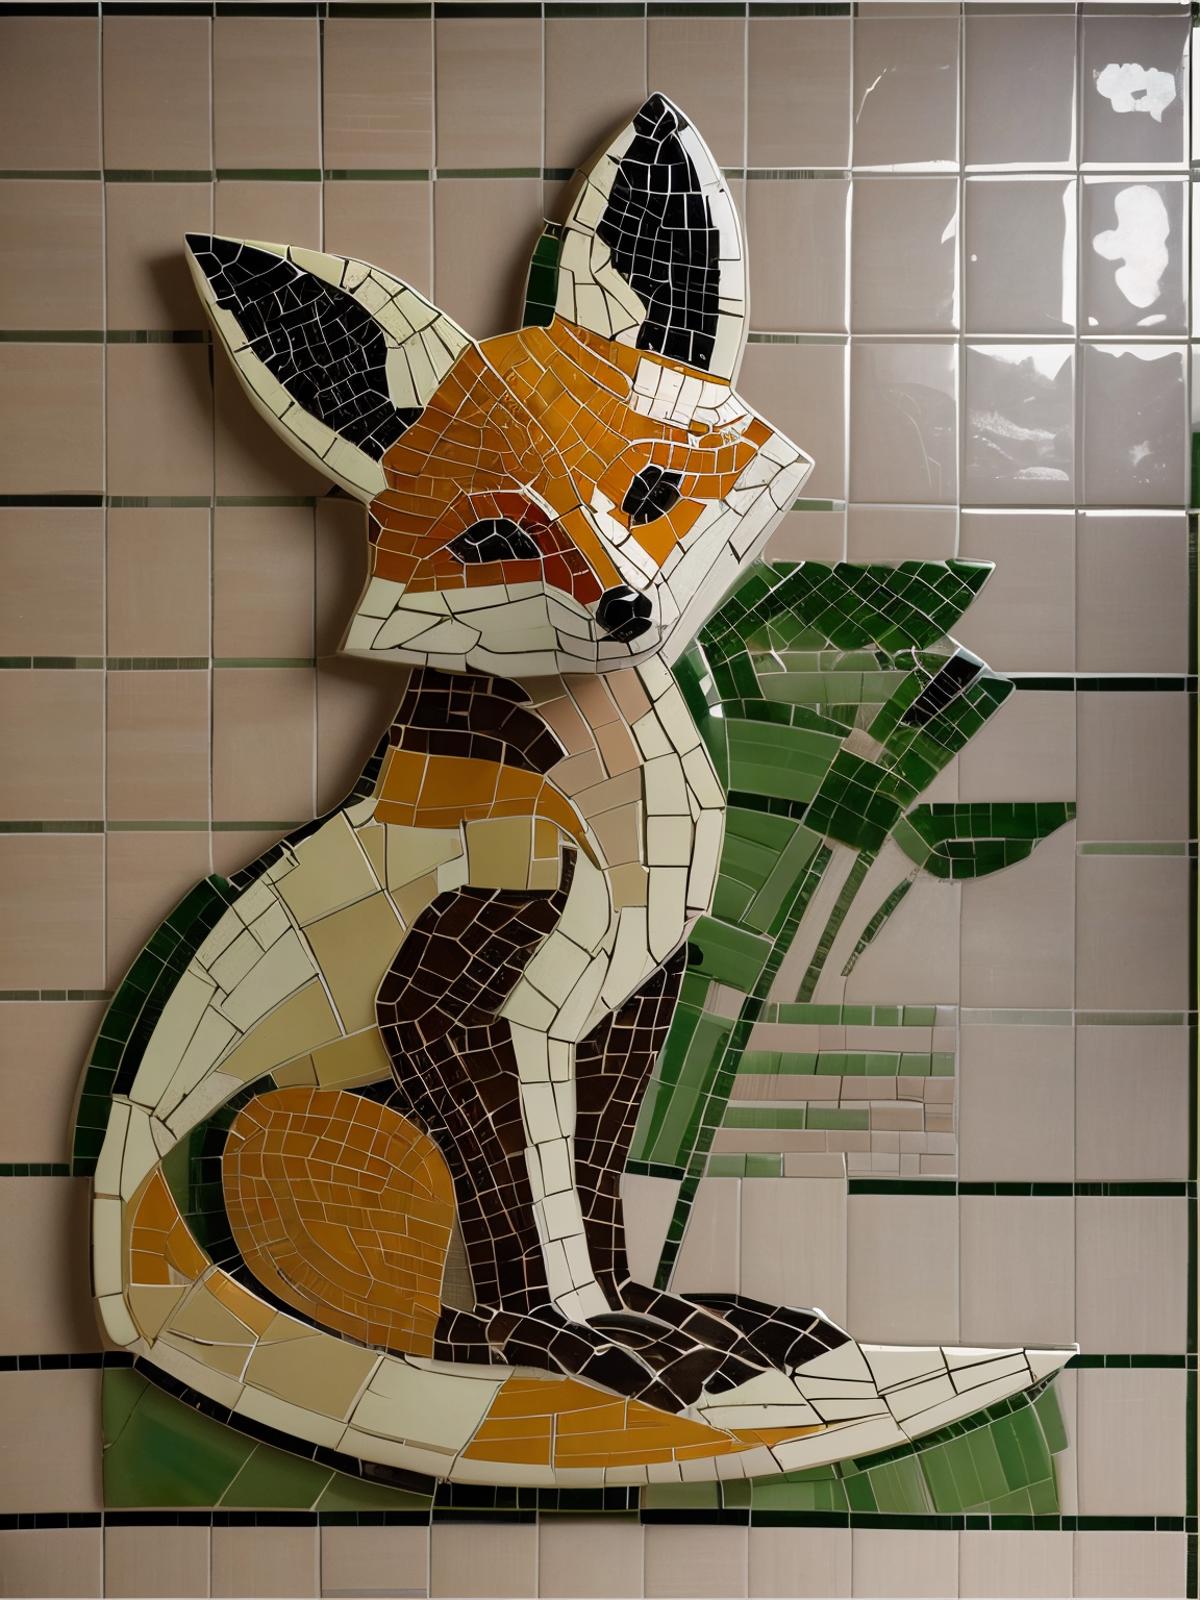 A fox made out of tiles on a wall.